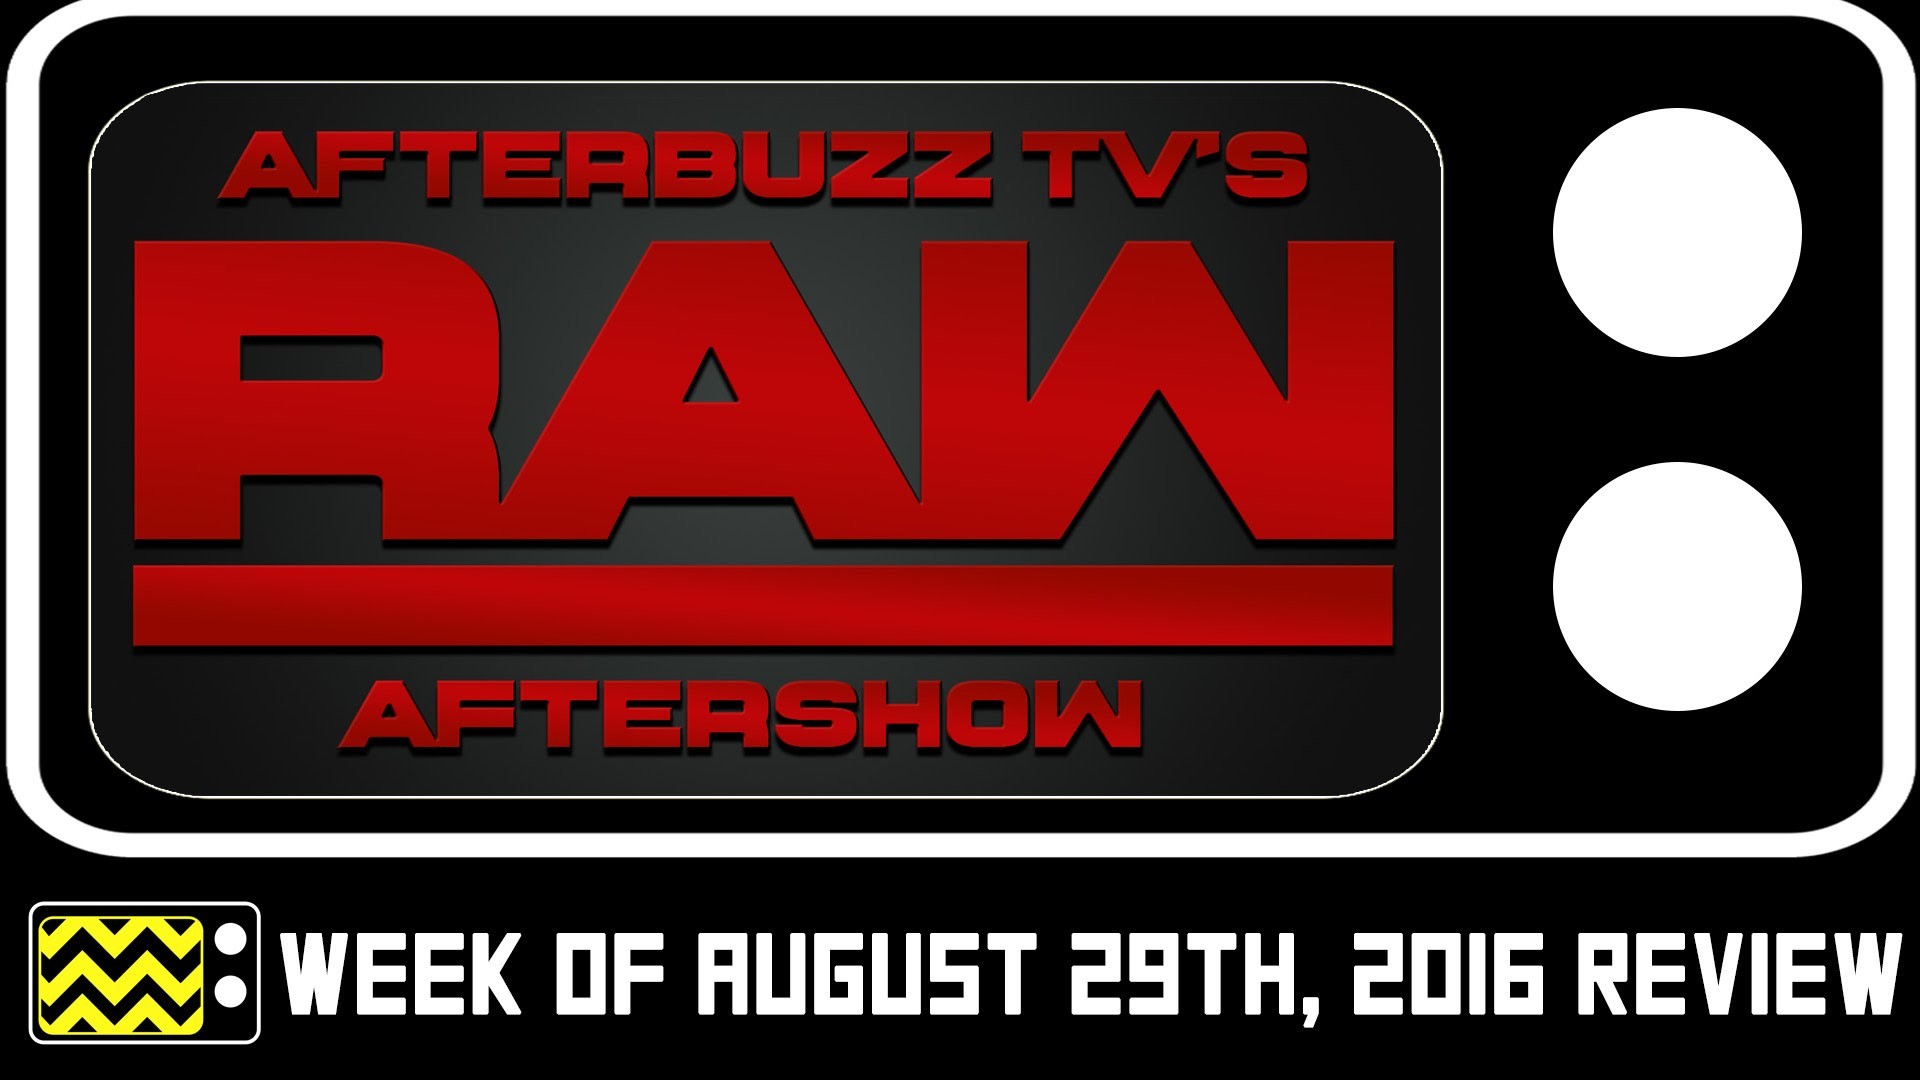 1920x1080 WWE's Monday Night RAW After Show for August 29th, 2016 | AfterBuzz TV -  YouTube